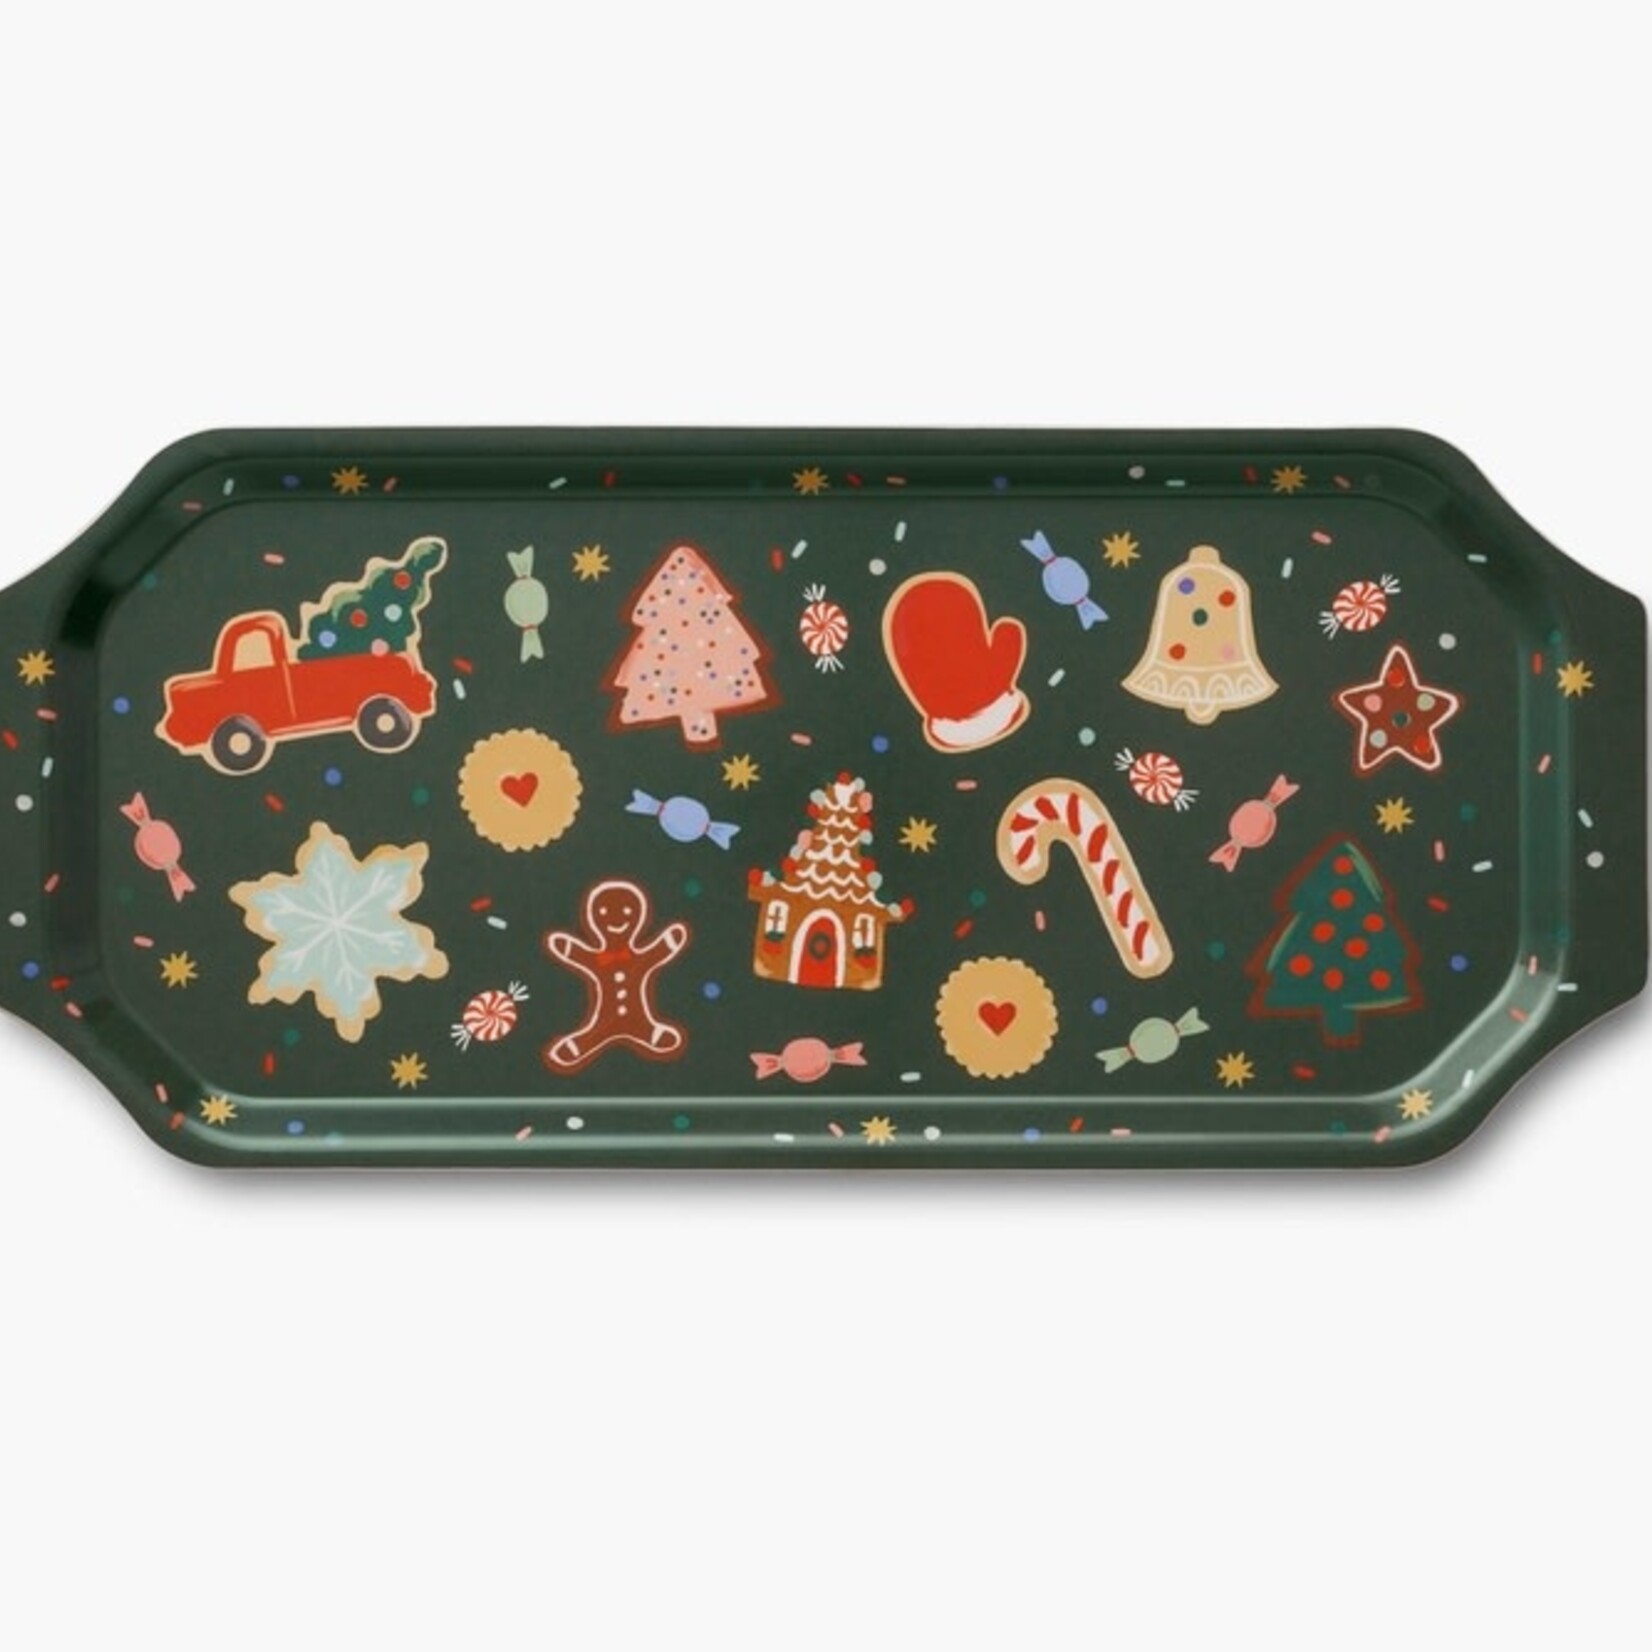 Rifle Paper Co Christmas Cookies Vintage Serving Tray